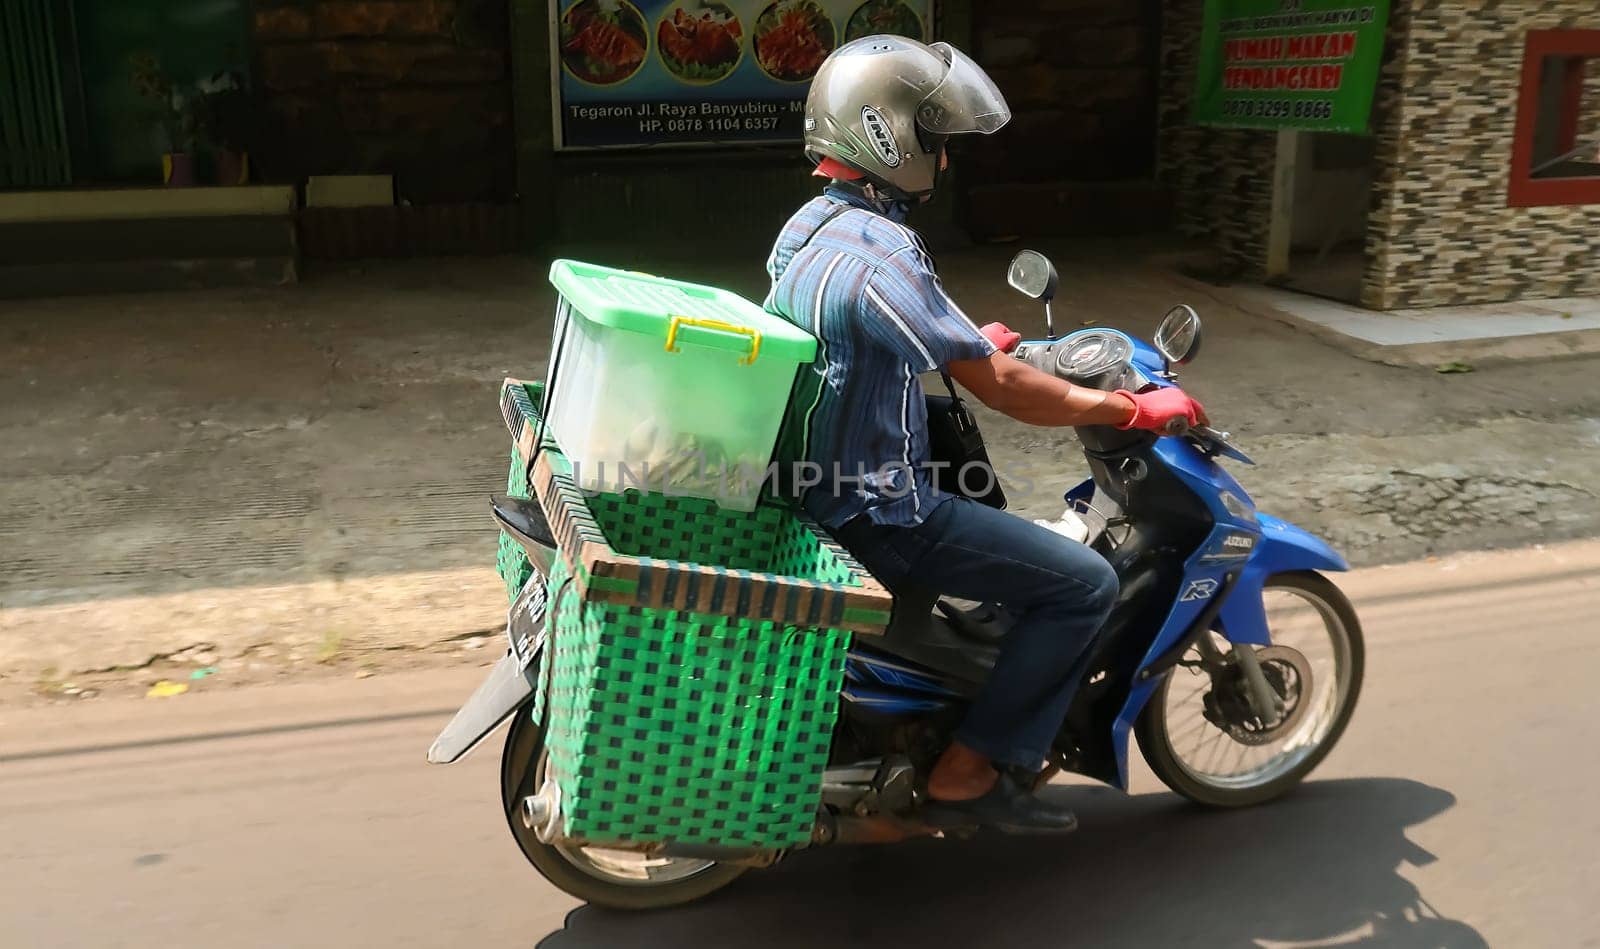 motorbike riding in asia as one of goods transportation method, being used to transport many kind of goods intercity in central java indonesia